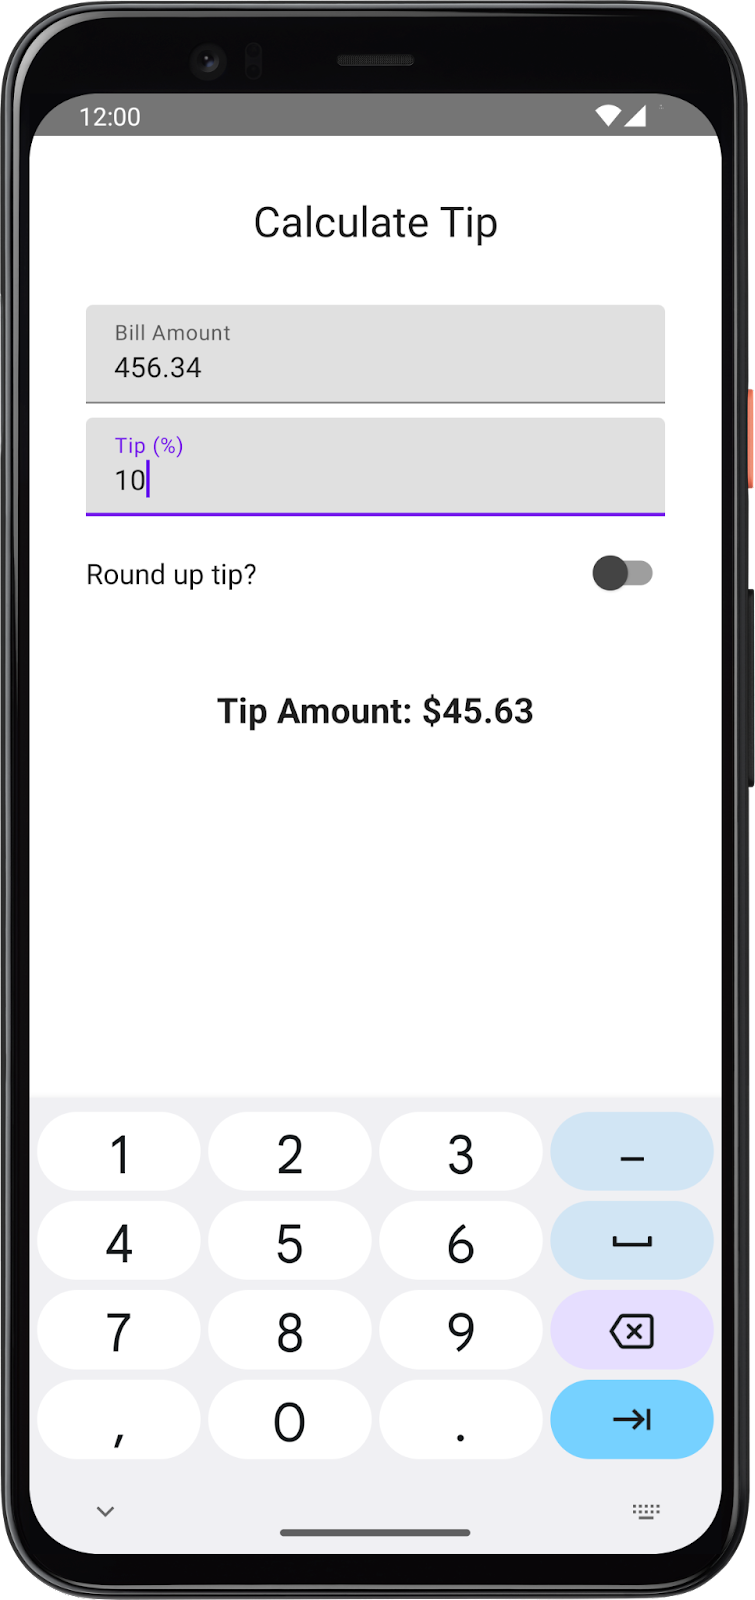 The images depicts the tip amount is not rounded up.